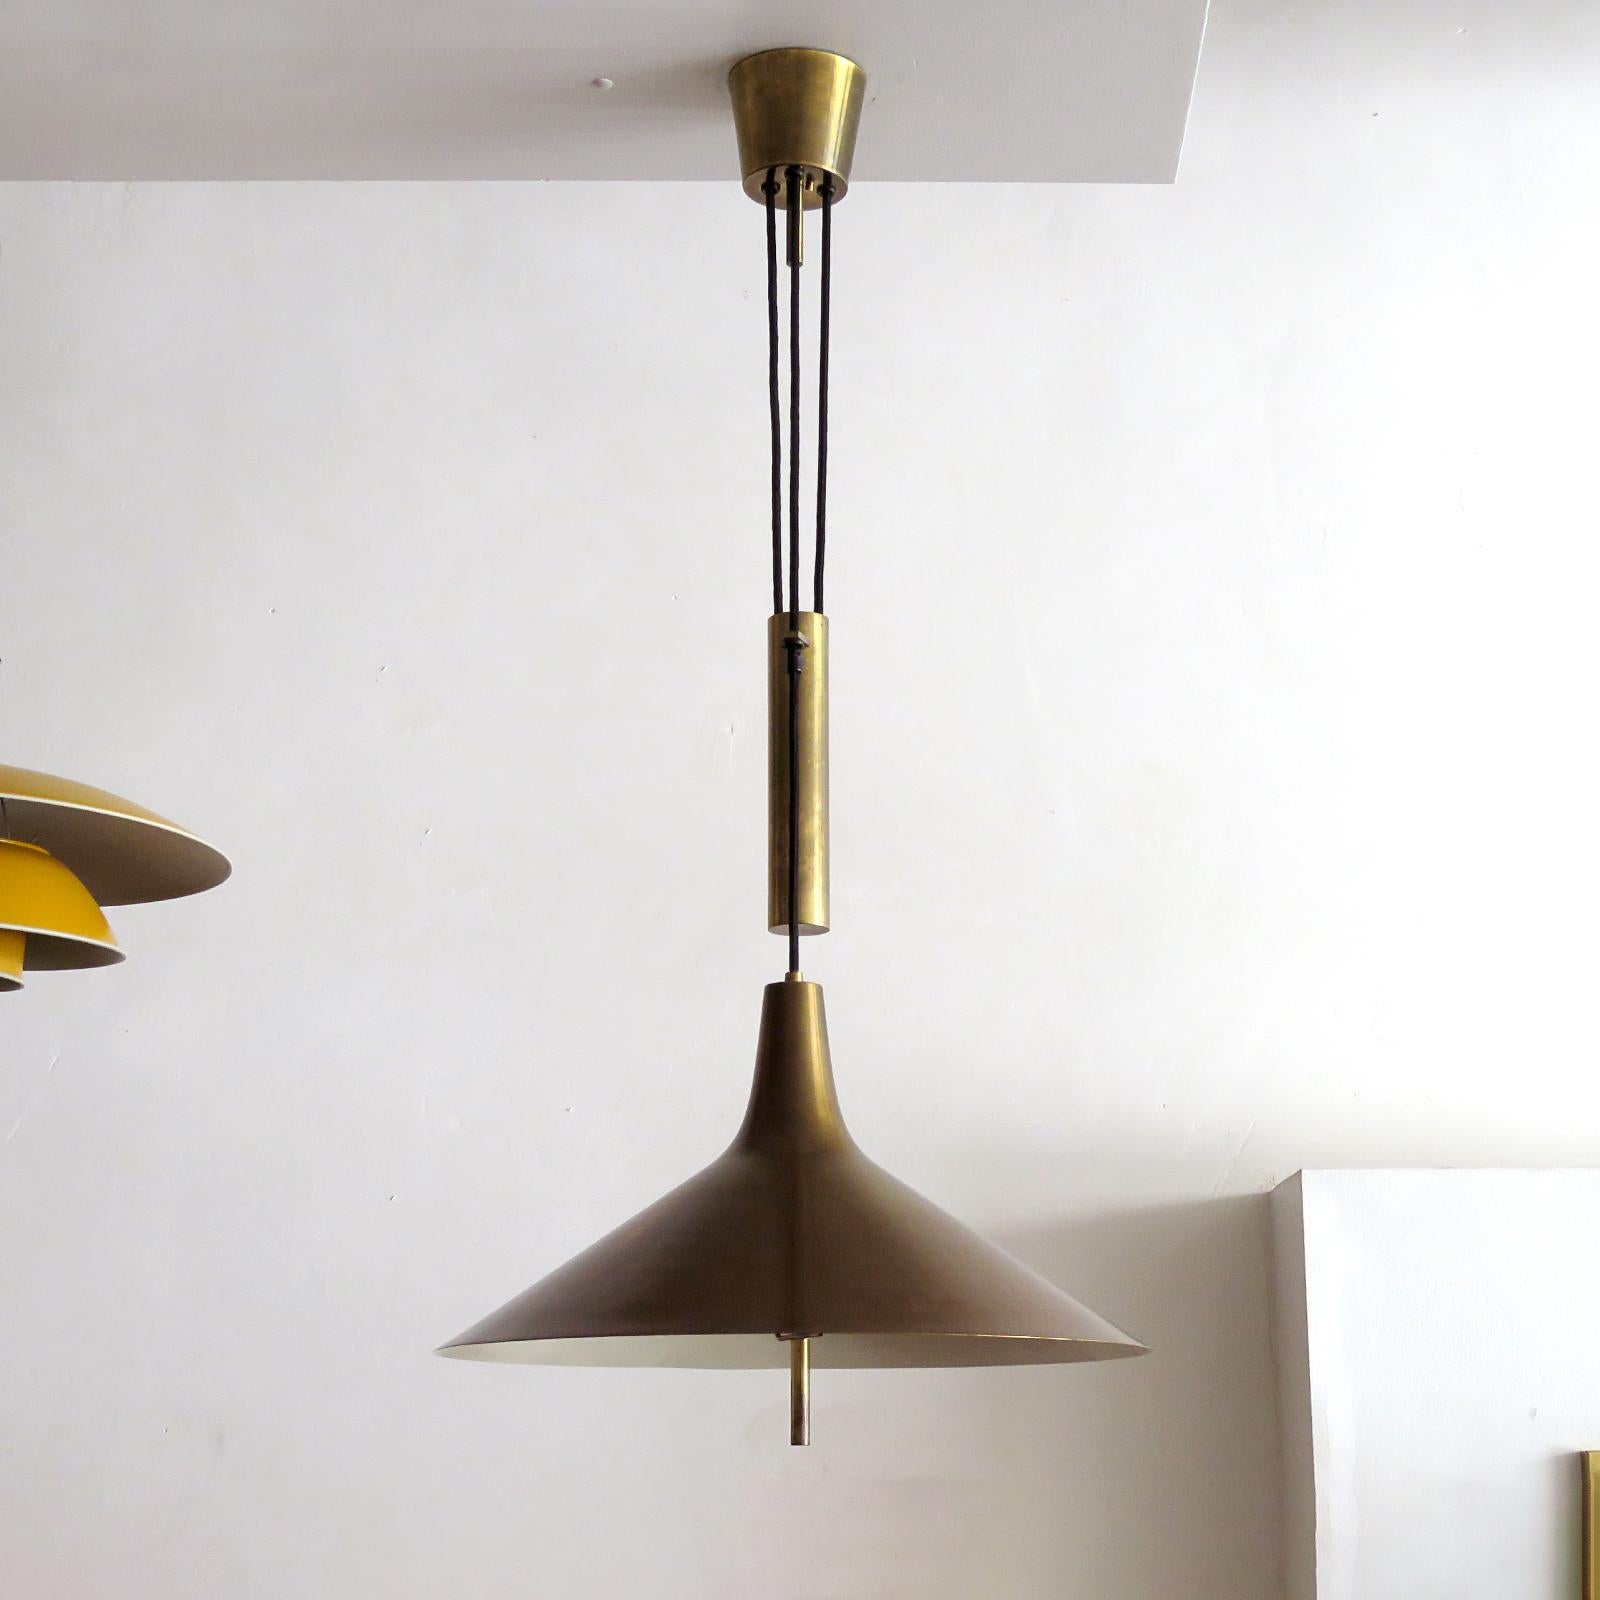 wonderful large brass pendant light 'Fusijama' by Th. Valentier of Copenhagen, Denmark, 1960s, with heavy adjustable counter weight system (height range 40